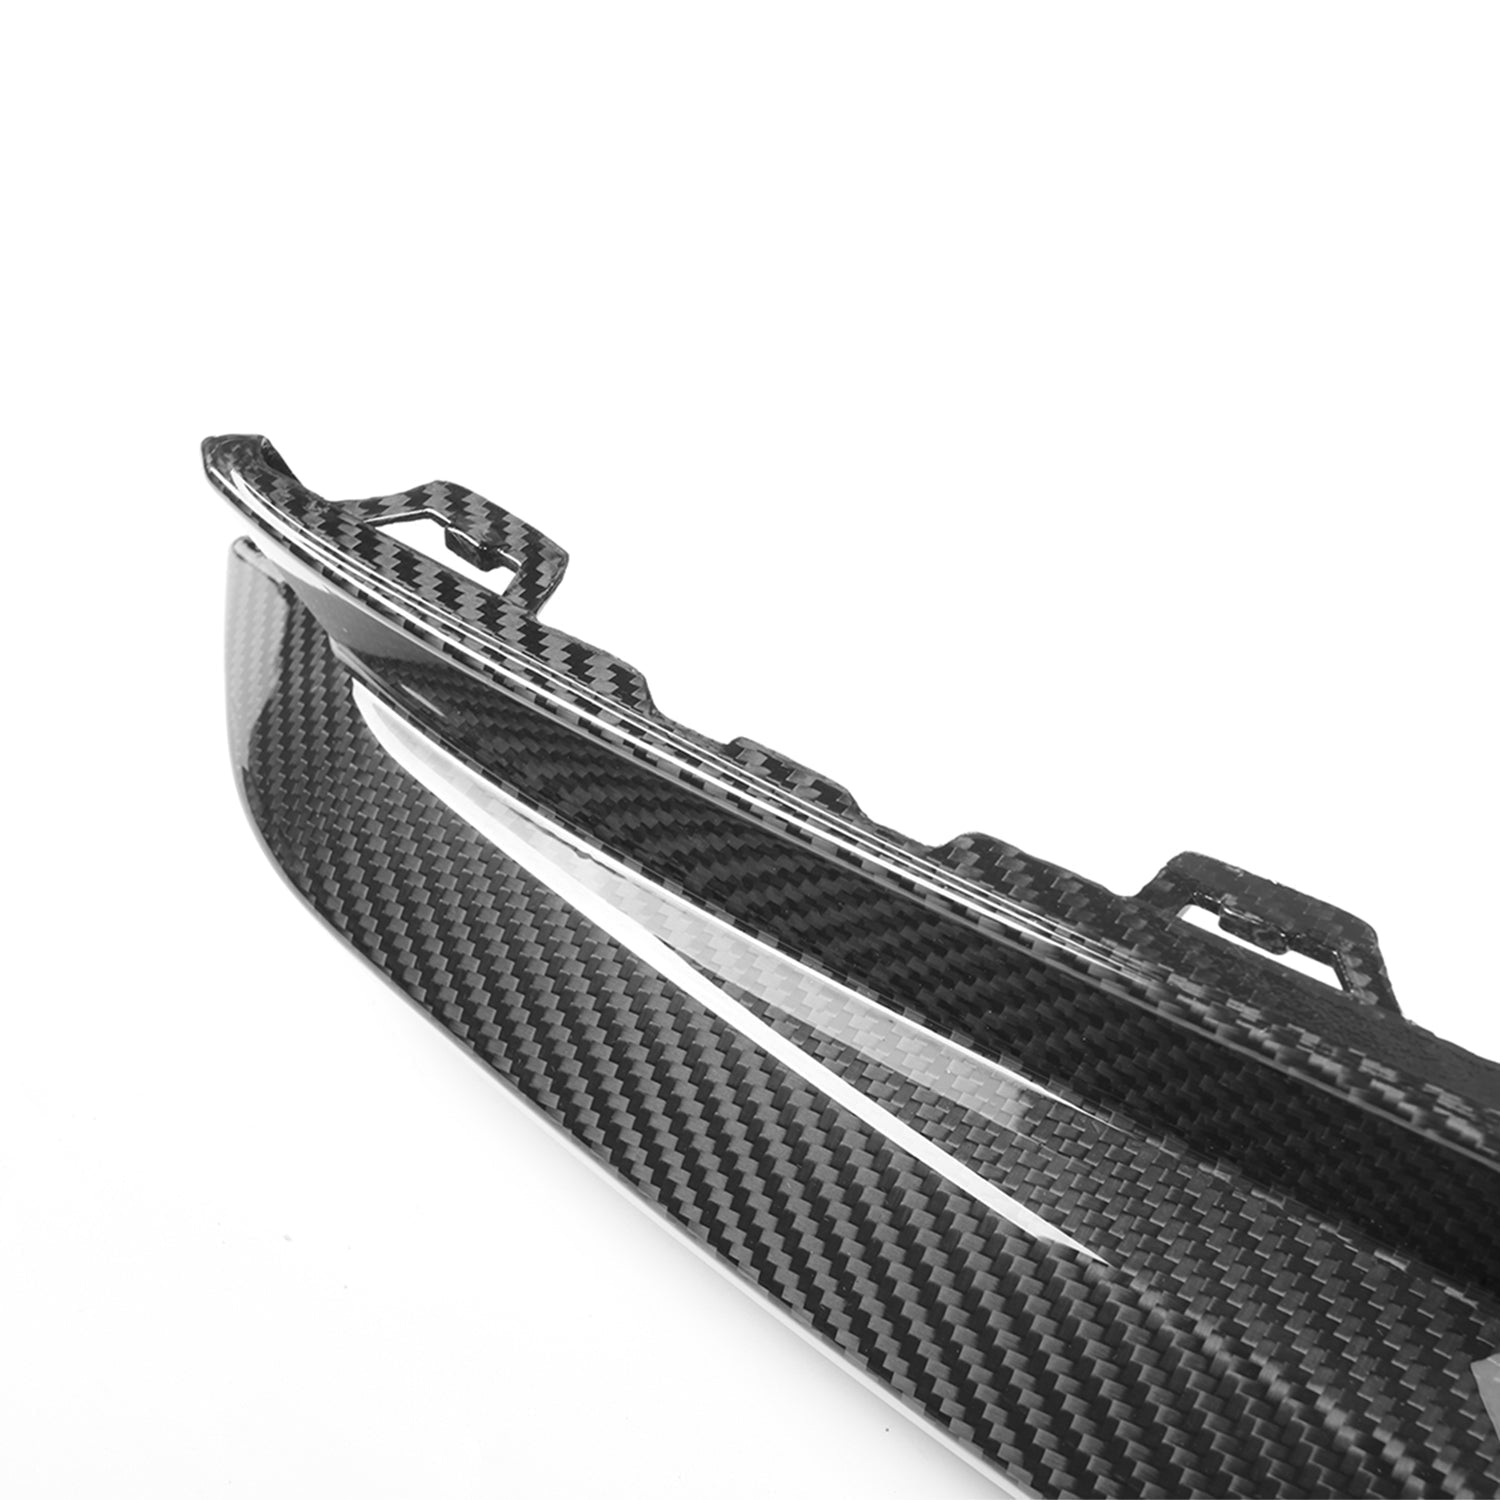 MHC+ BMW M4 OEM Style Replacement Rear Side Diffusers In Pre Preg Carbon Fibre (G82/G83)-R44 Performance